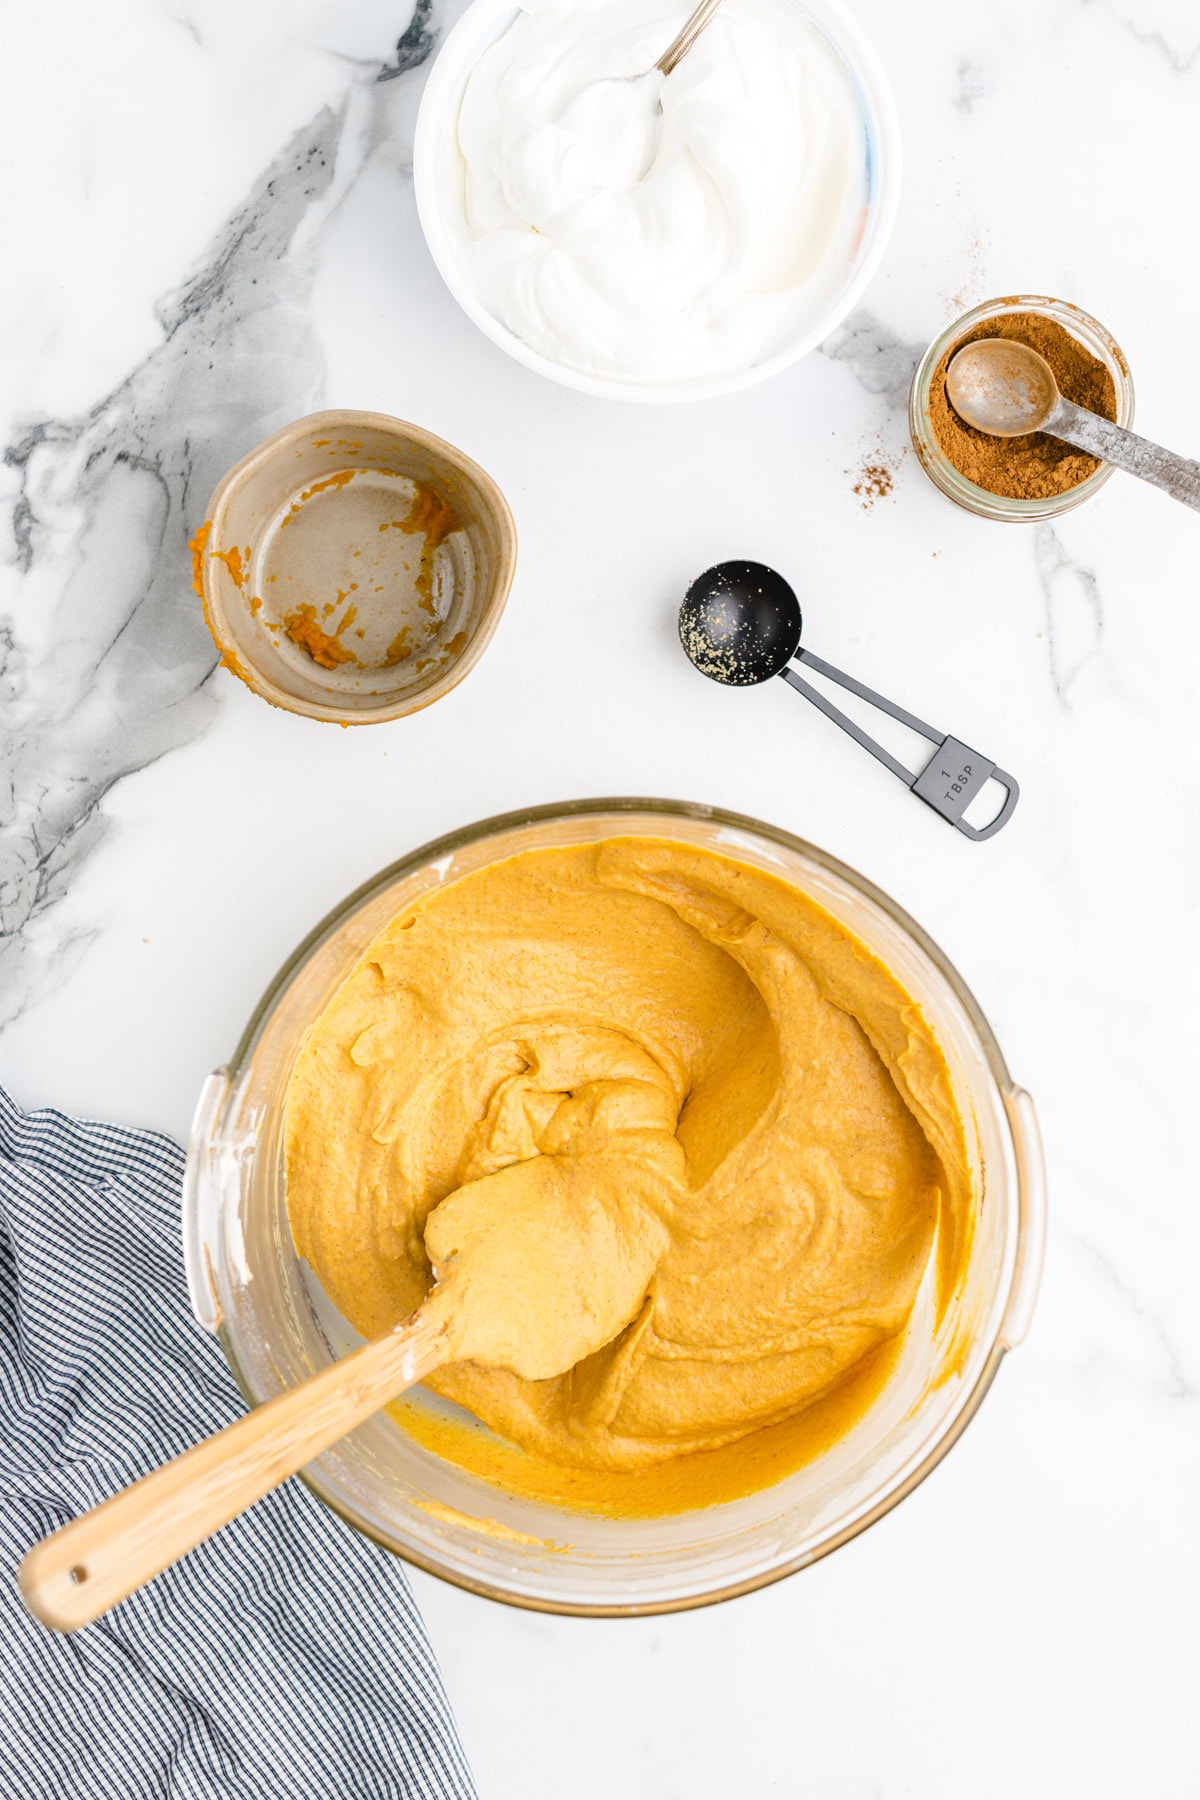 Add the pumpkin puree, brown sugar and pumpkin pie spice to the cream cheese mixture and gently fold together until combined and solid in color